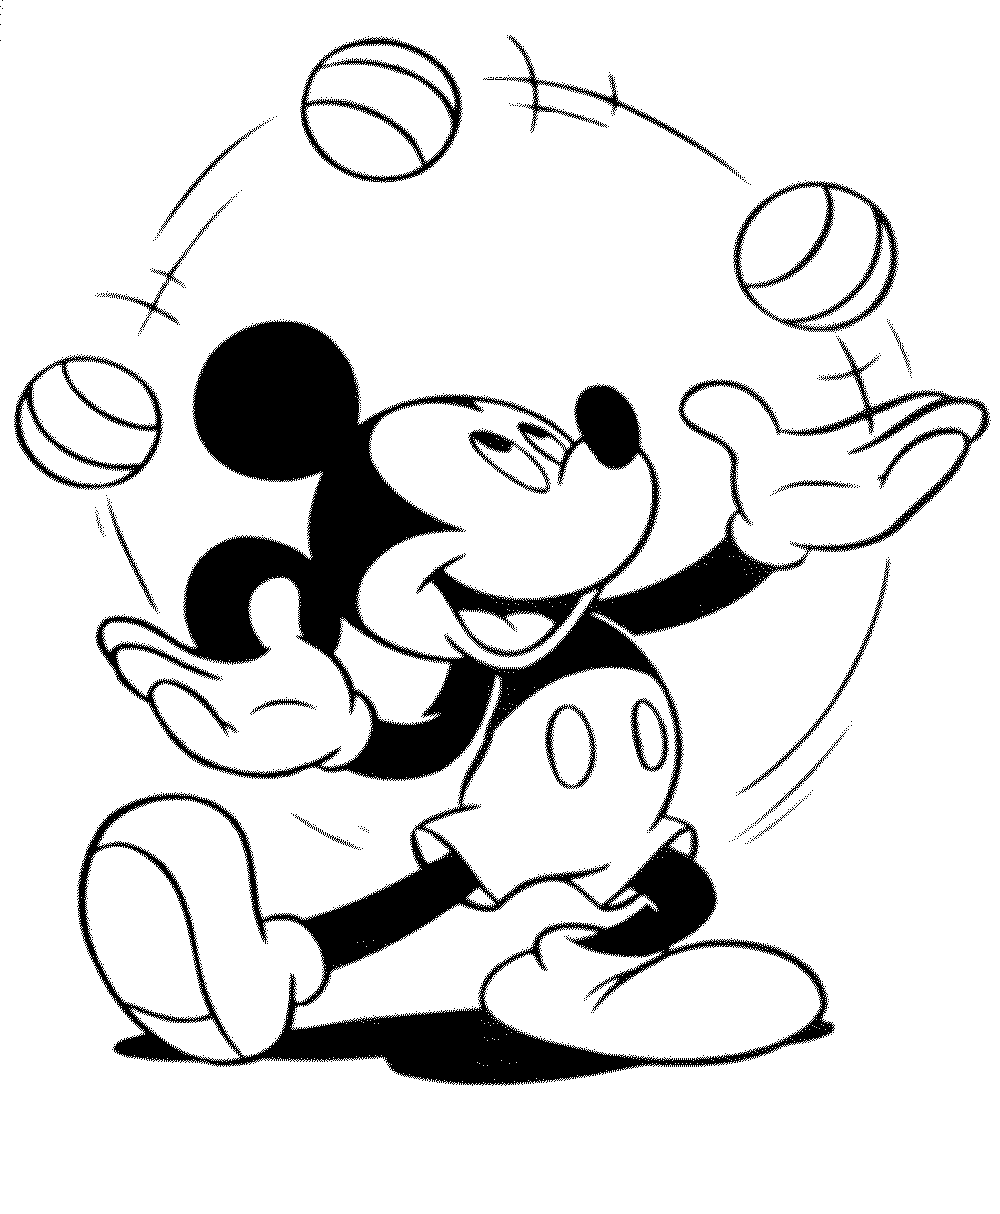 printable mickey mouse coloring pages